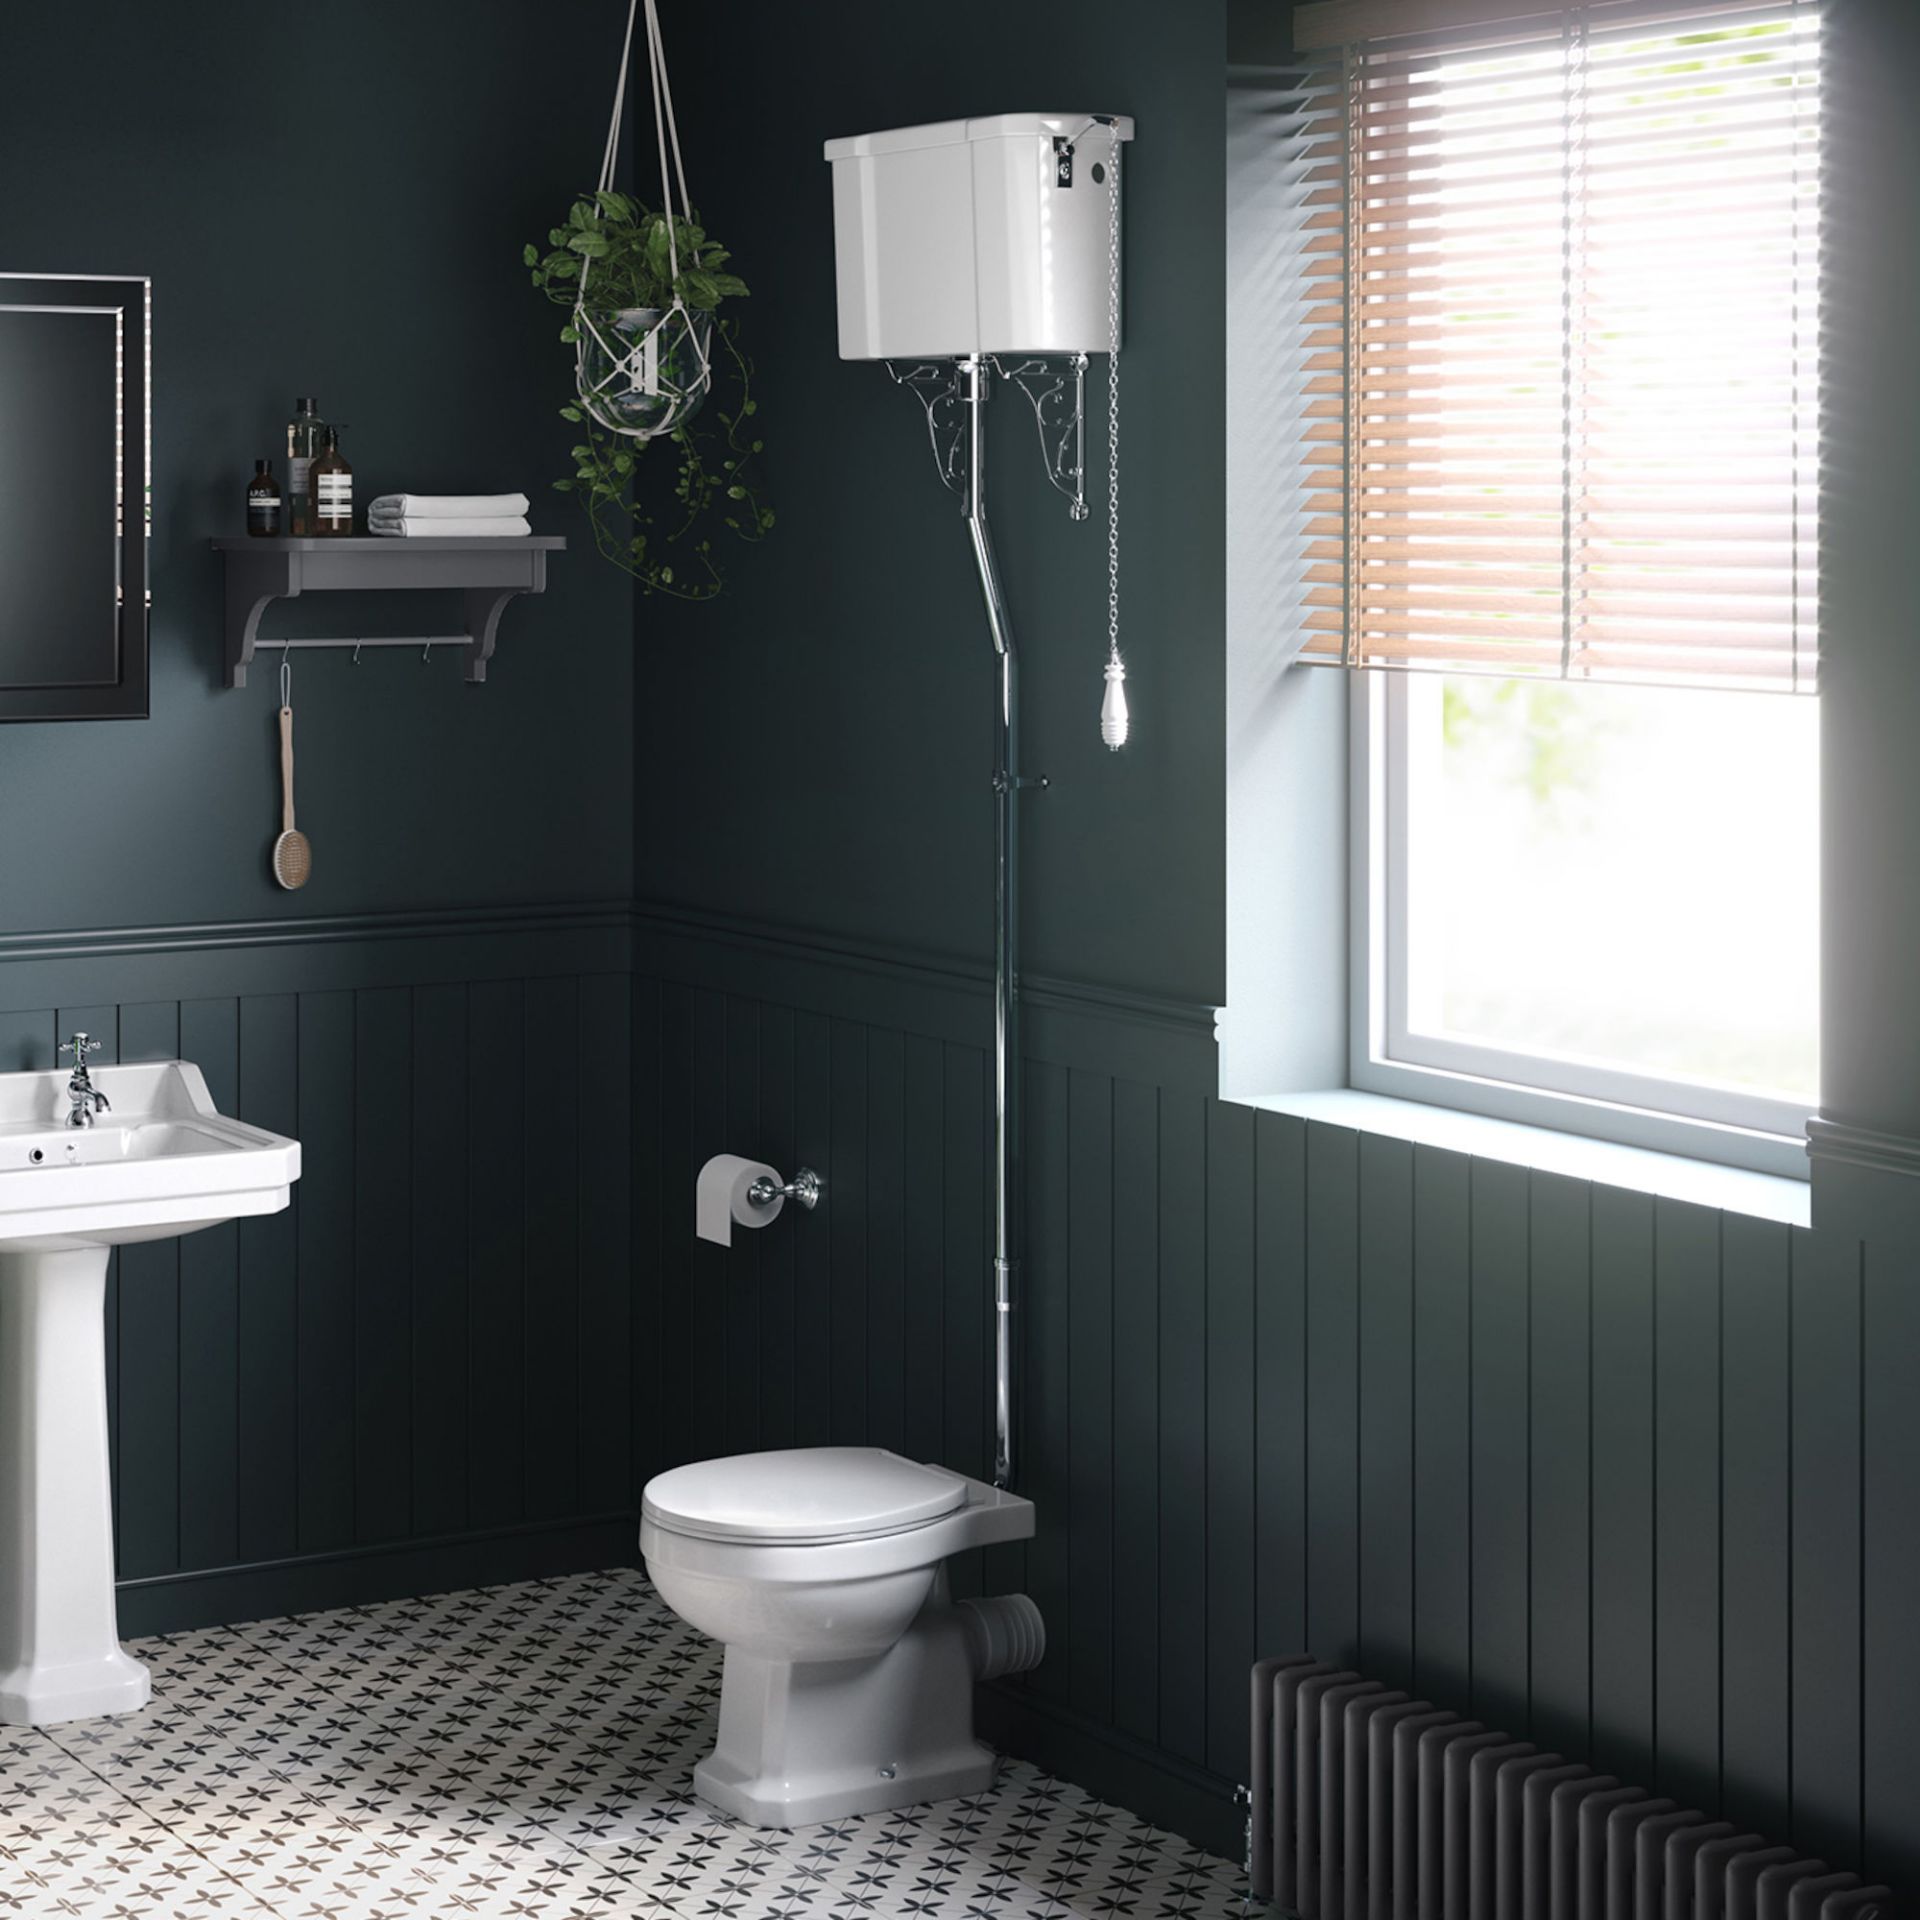 (PP29) Cambridge Traditional Toilet with High-Level Cistern - White Seat. RRP £679.99. Traditi...